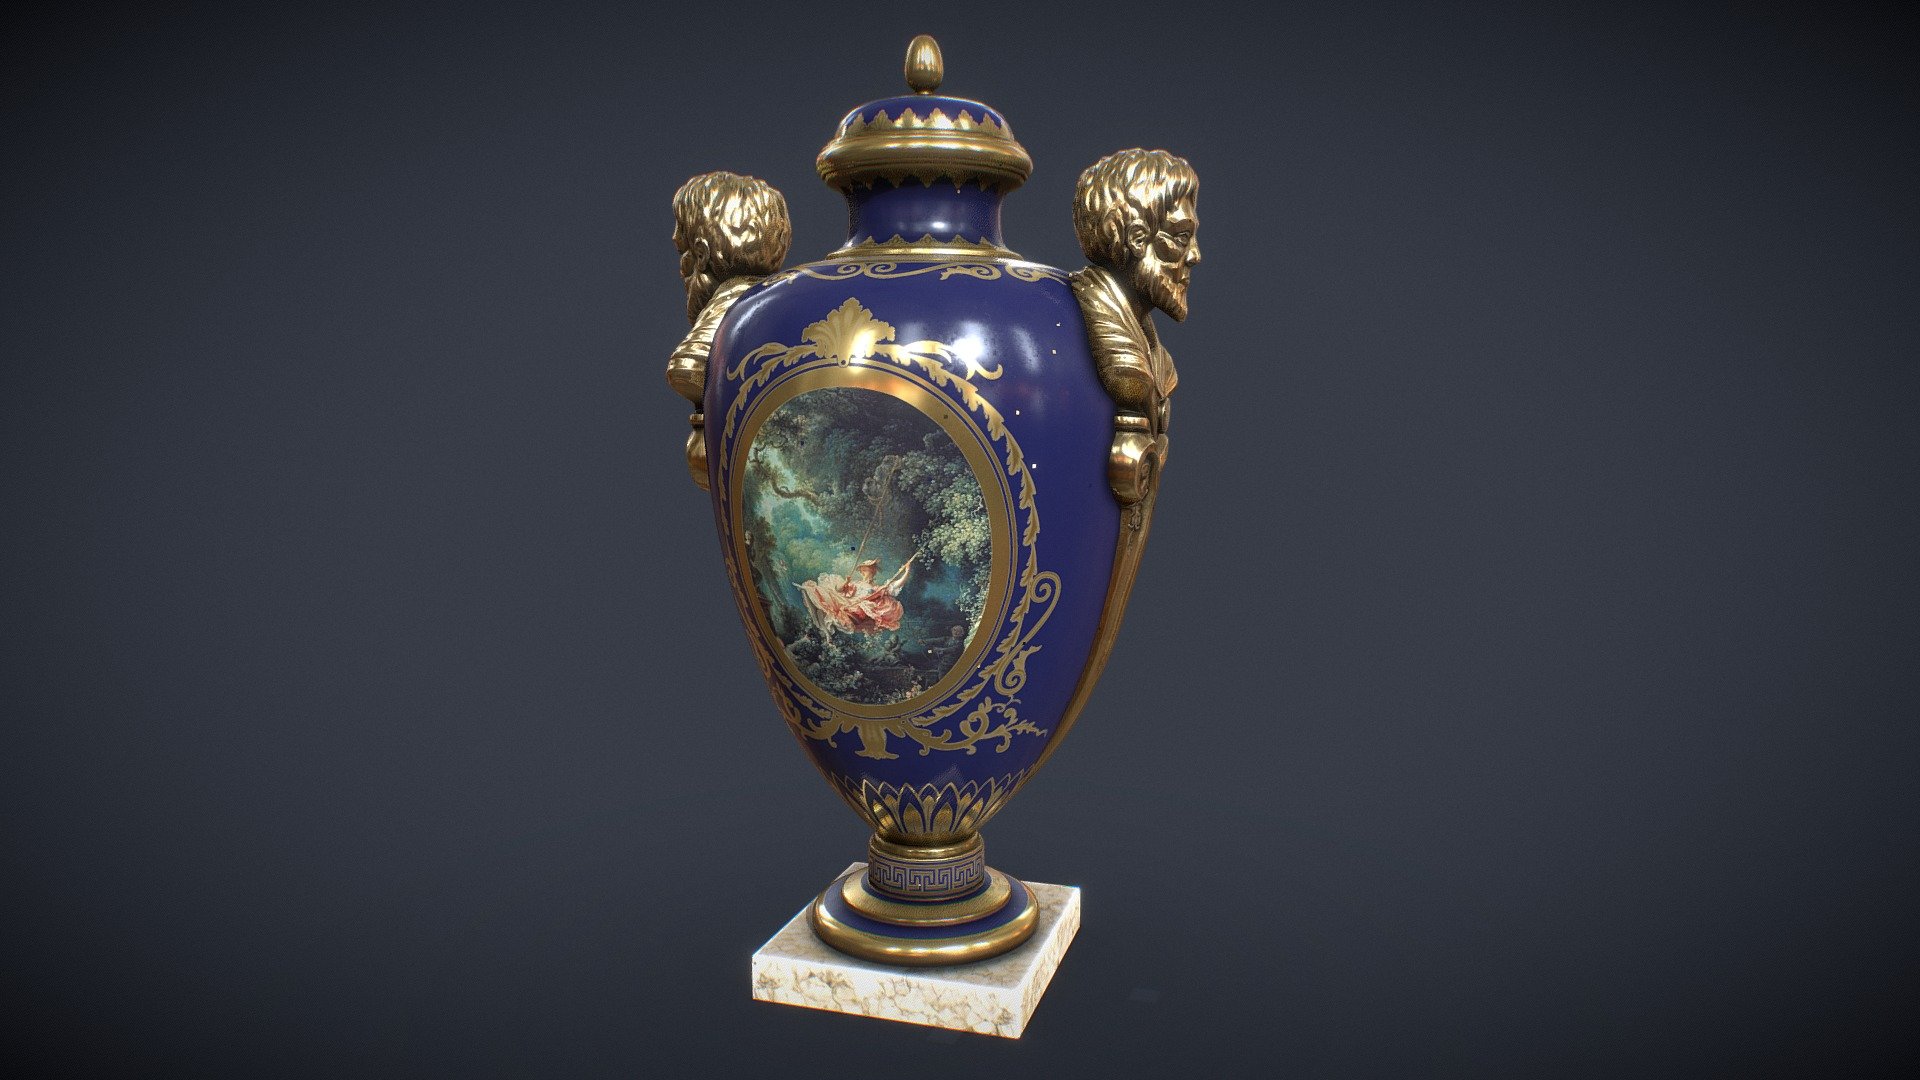 Hi Everyone ! This is an asset made for a personal project of a victorian scenary, this vase will go over the top of the shelf!

Made with Maya, PS and Substance.

You will find in the package Scene file, FBX and 4k Textures.
If you have any customs need, please feel free to contact me 3d model